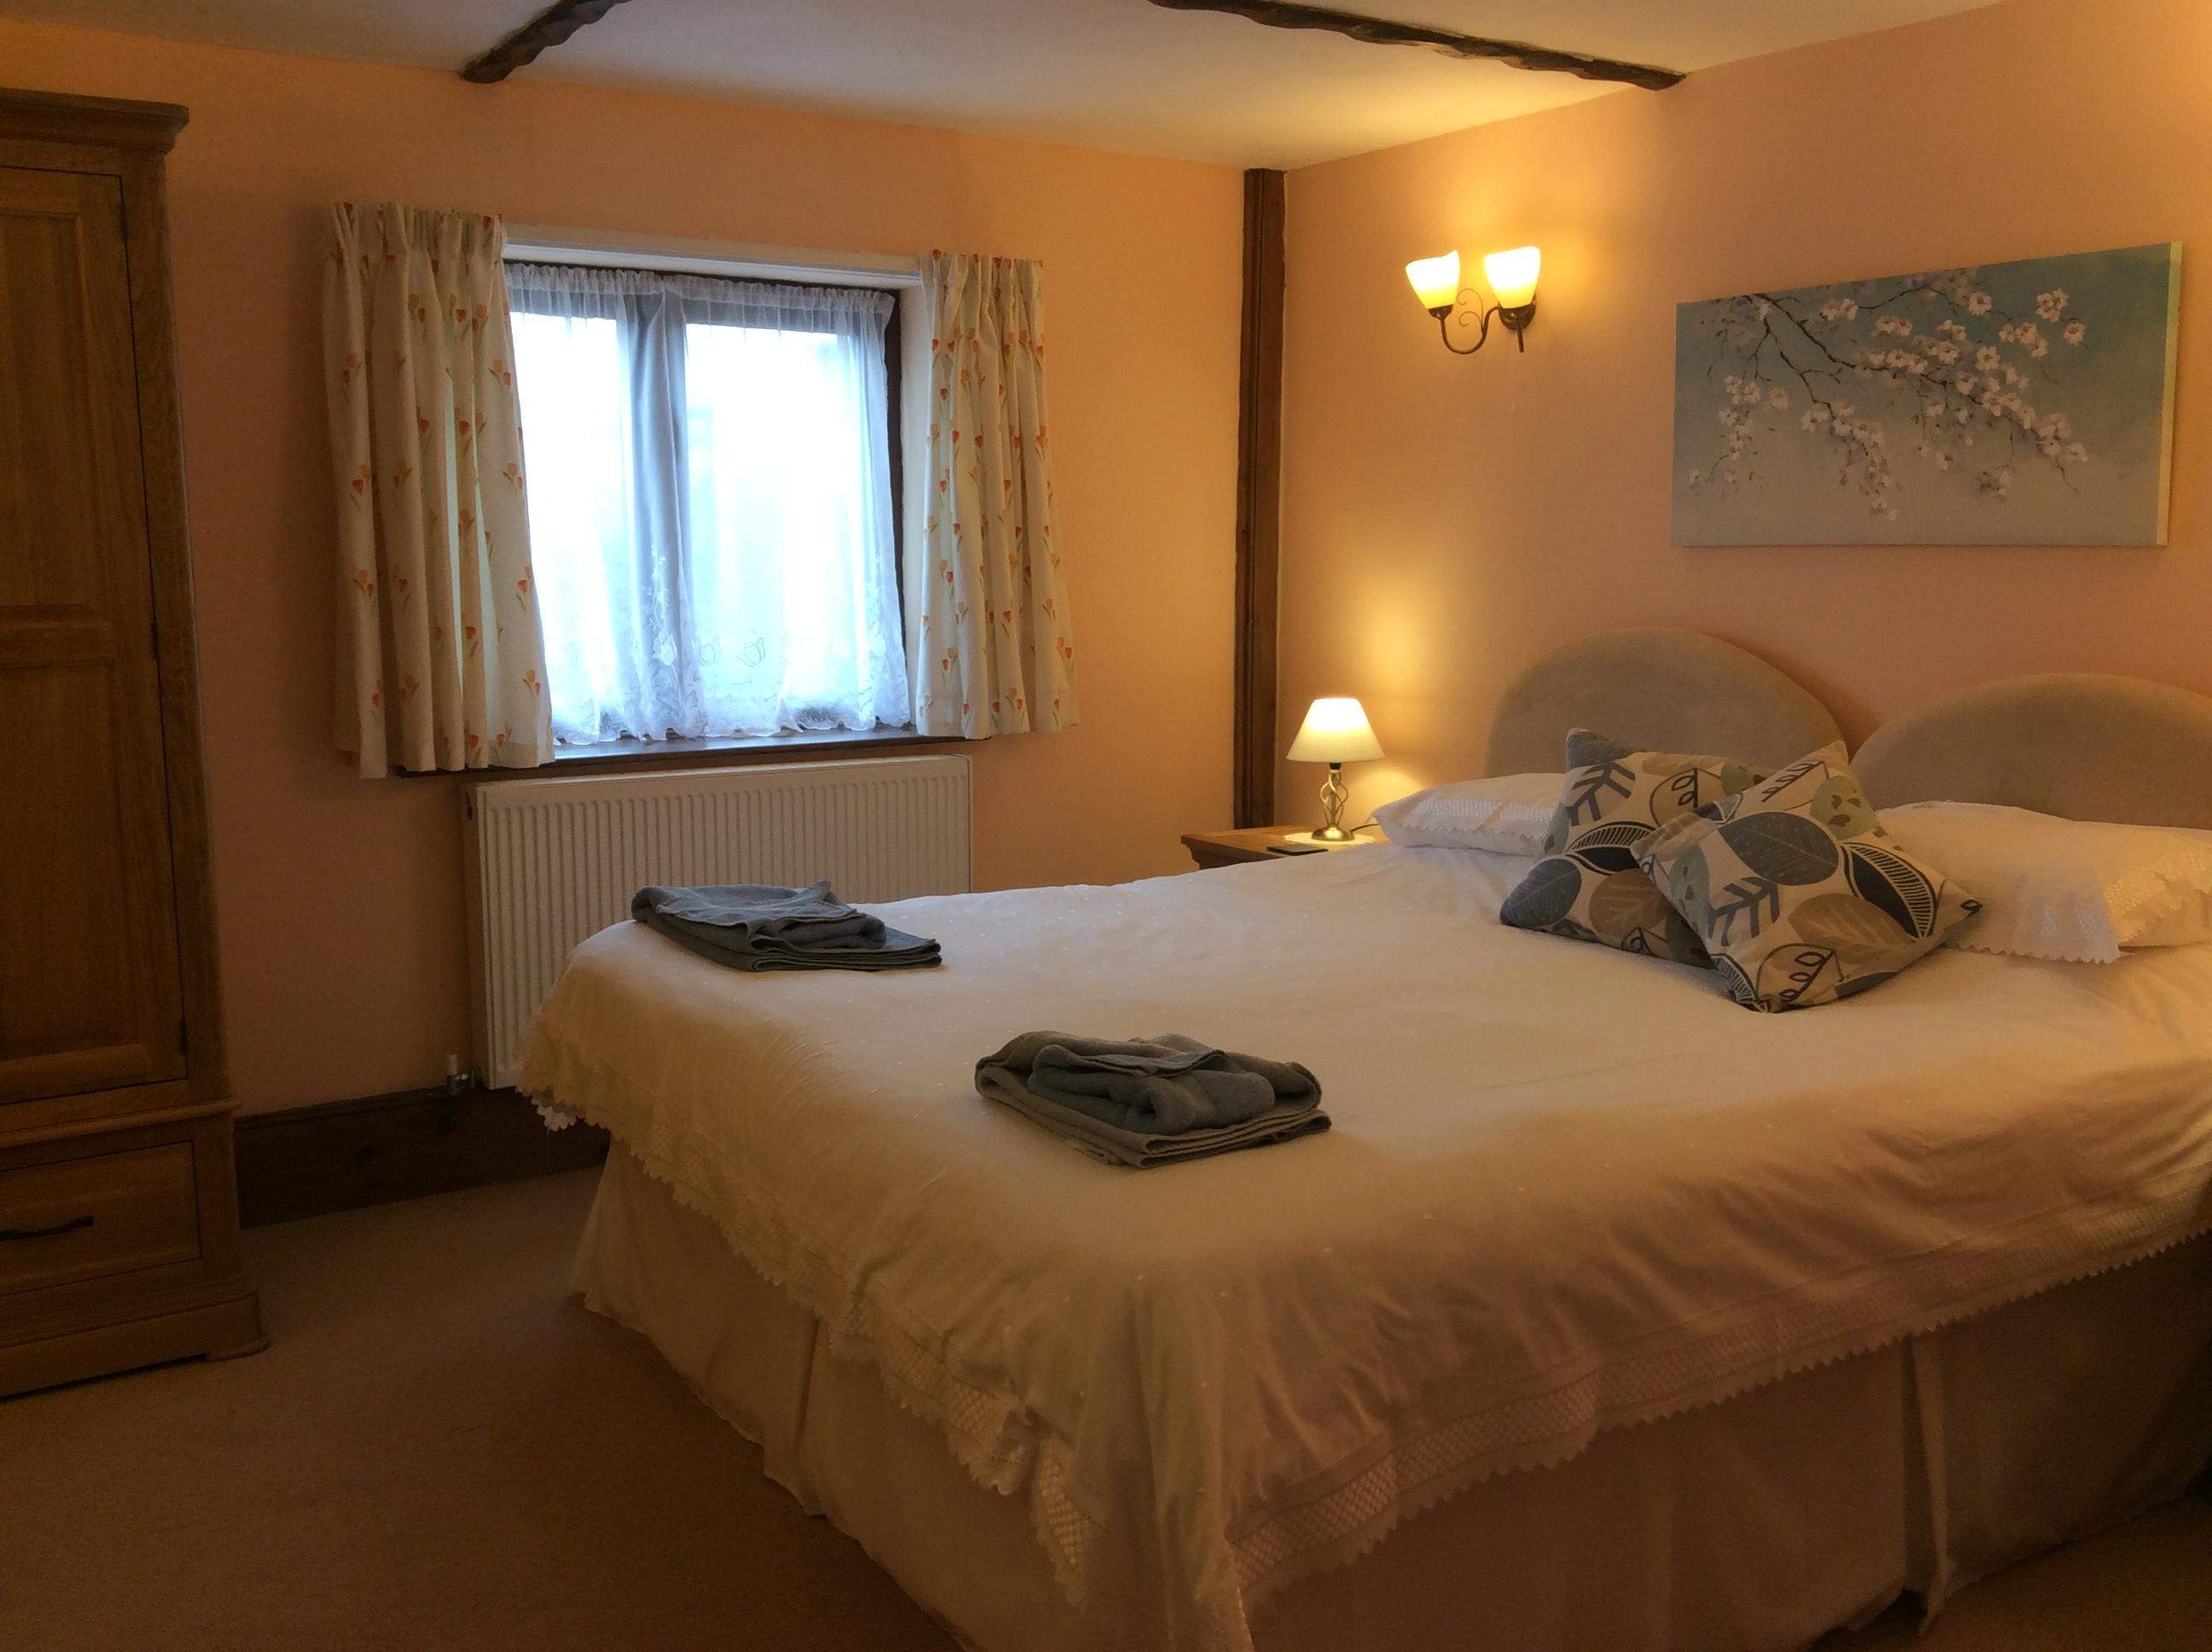 All on one level, with large enclosed garden, double and single bedrooms with shared bathroom